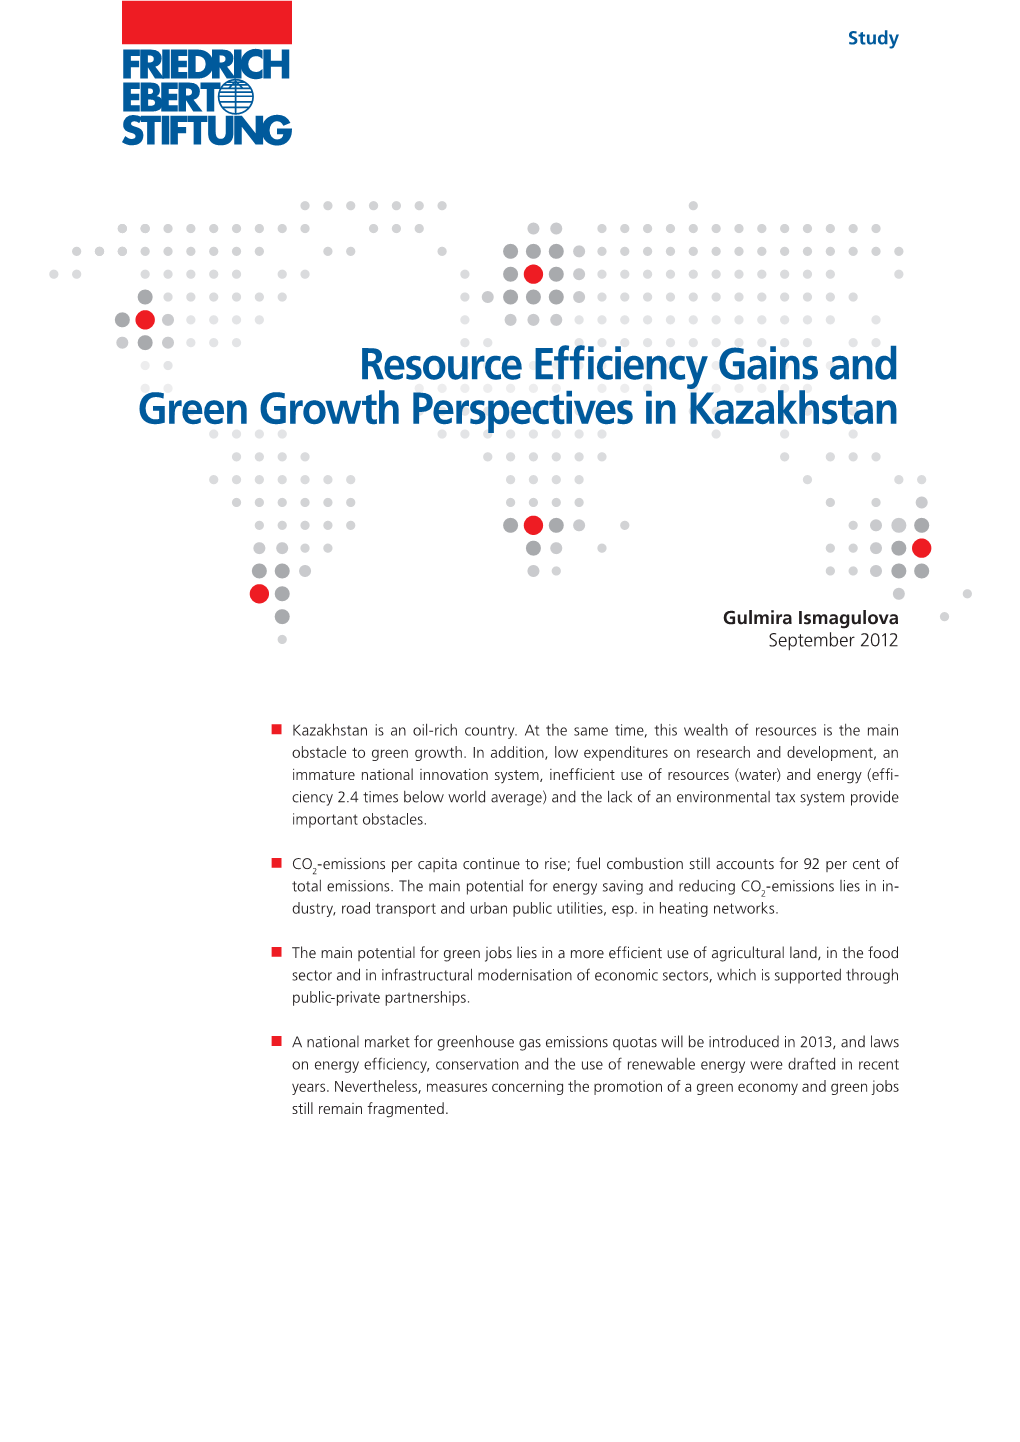 Resource Efficiency Gains and Green Growth Perspectives in Kazakhstan